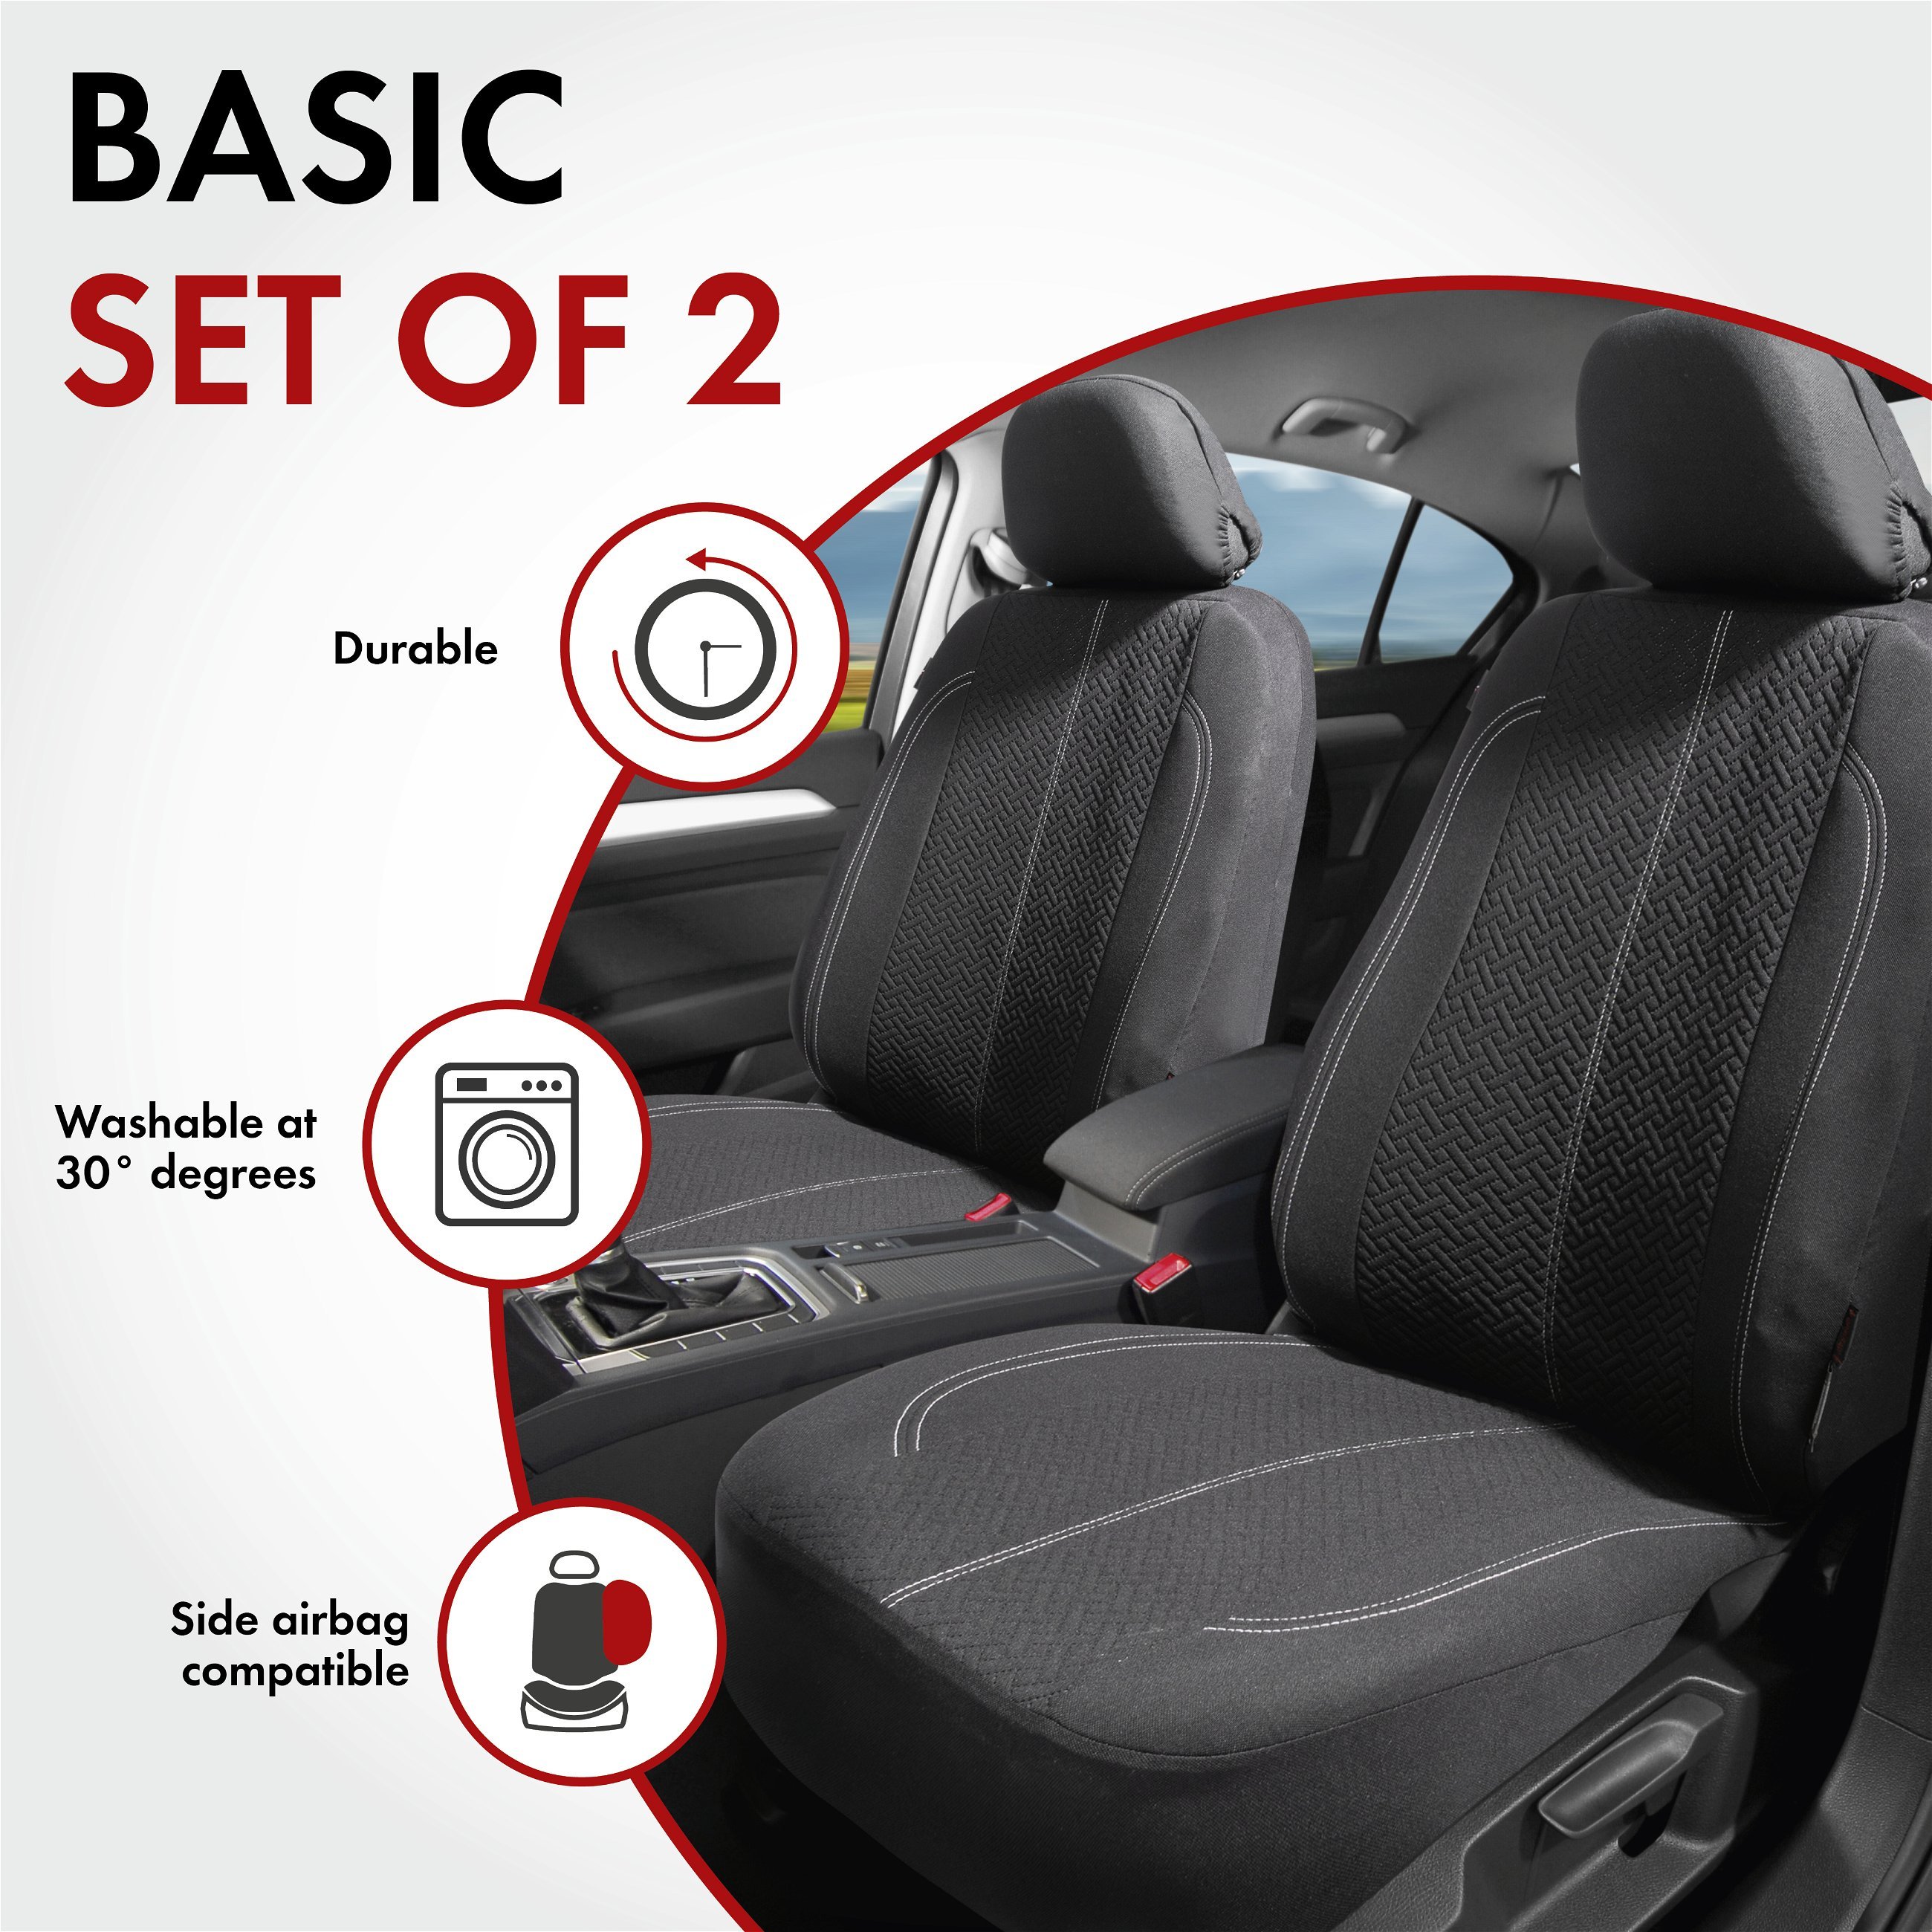 ZIPP IT Car seat covers Tratto for two front seats with zip-system black